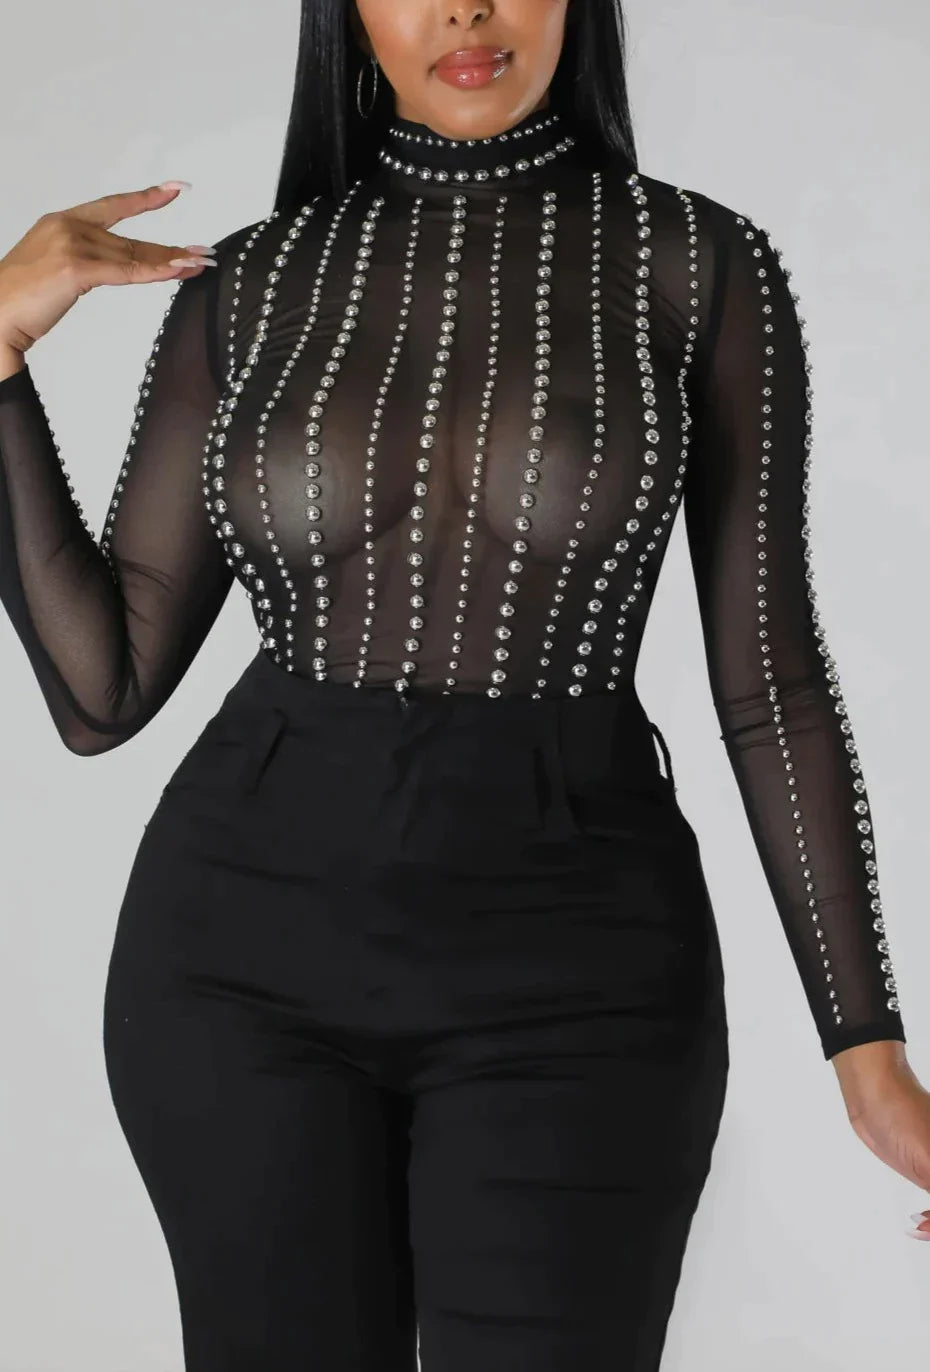 Sheer Studded Top - SASHAY COUTURE BOUTIQUE